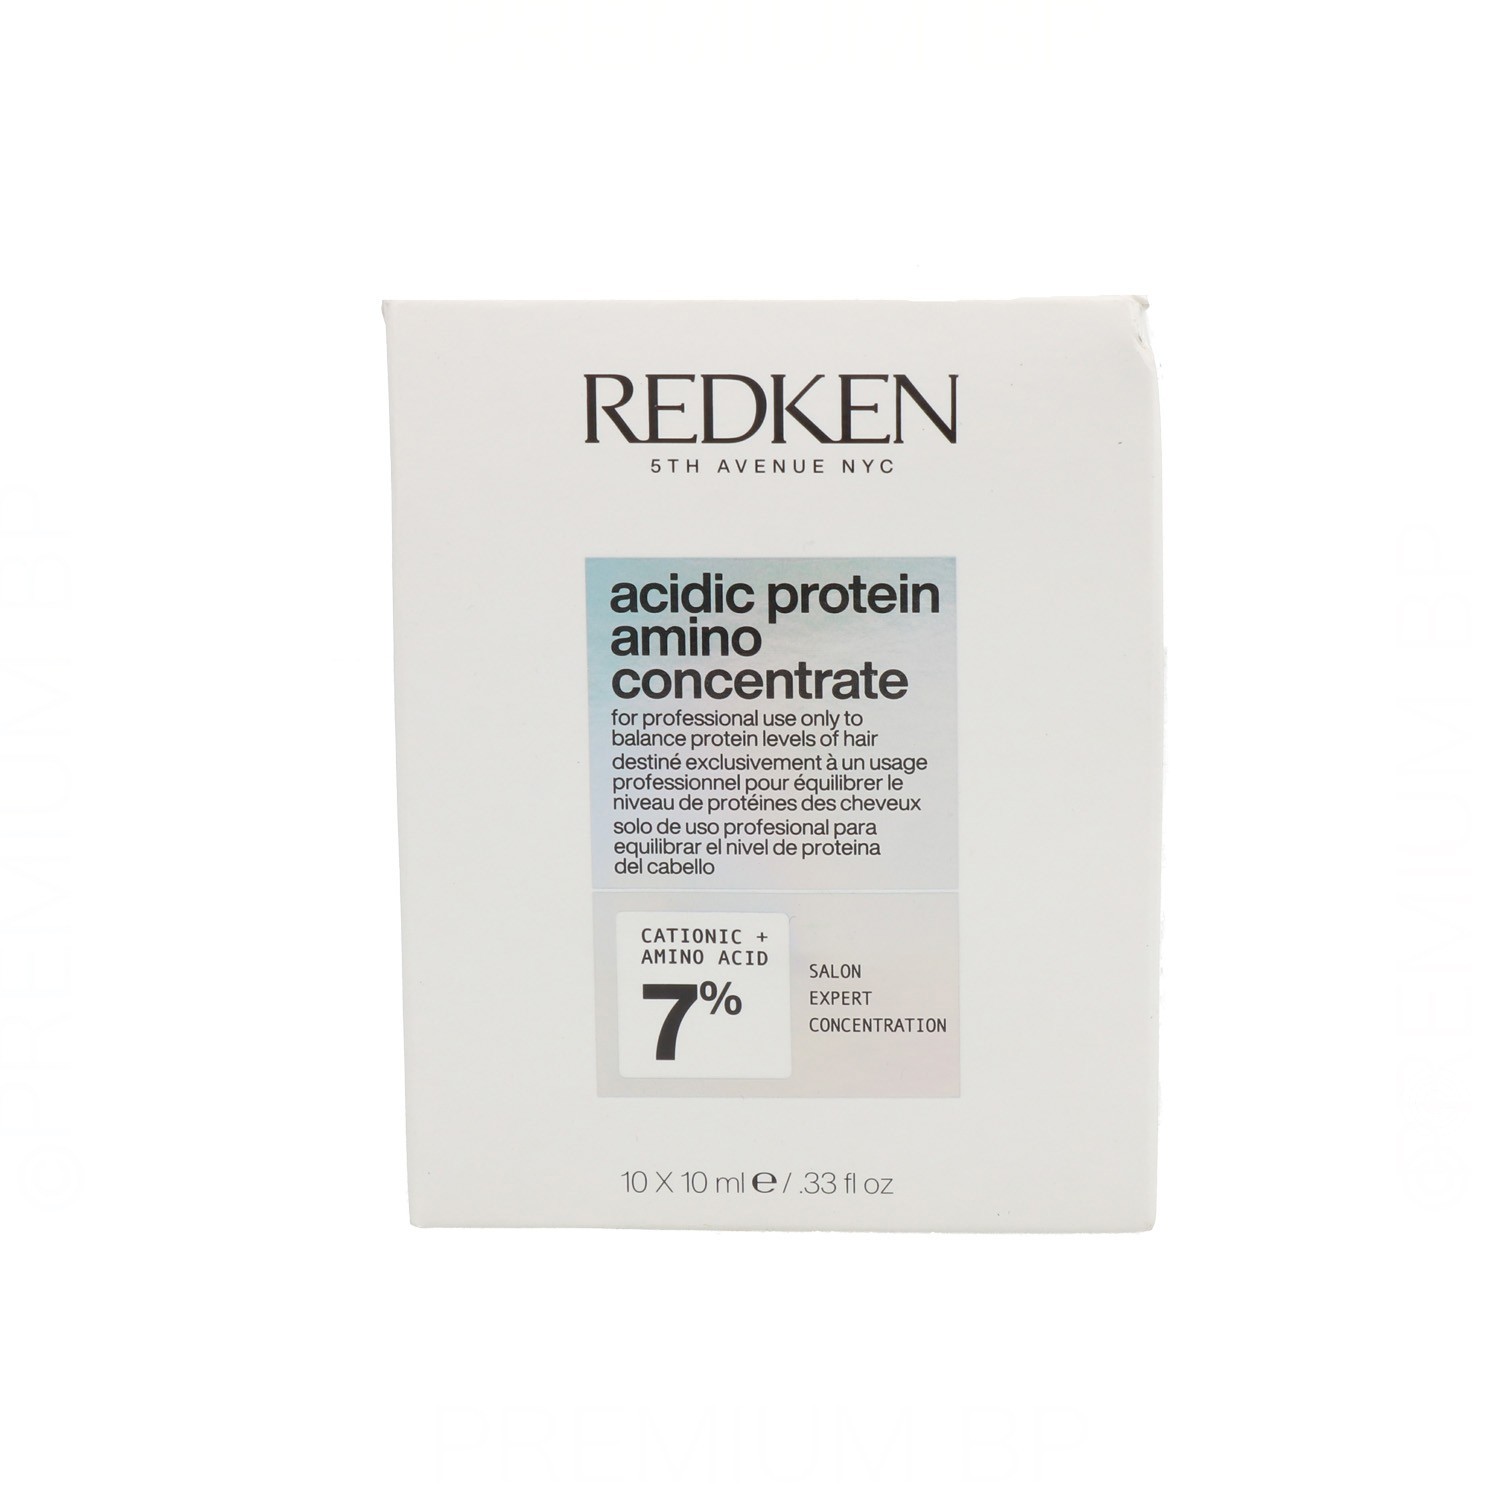 Redken Acidic Protein Amino Concentrate Treatment 10X10 ml